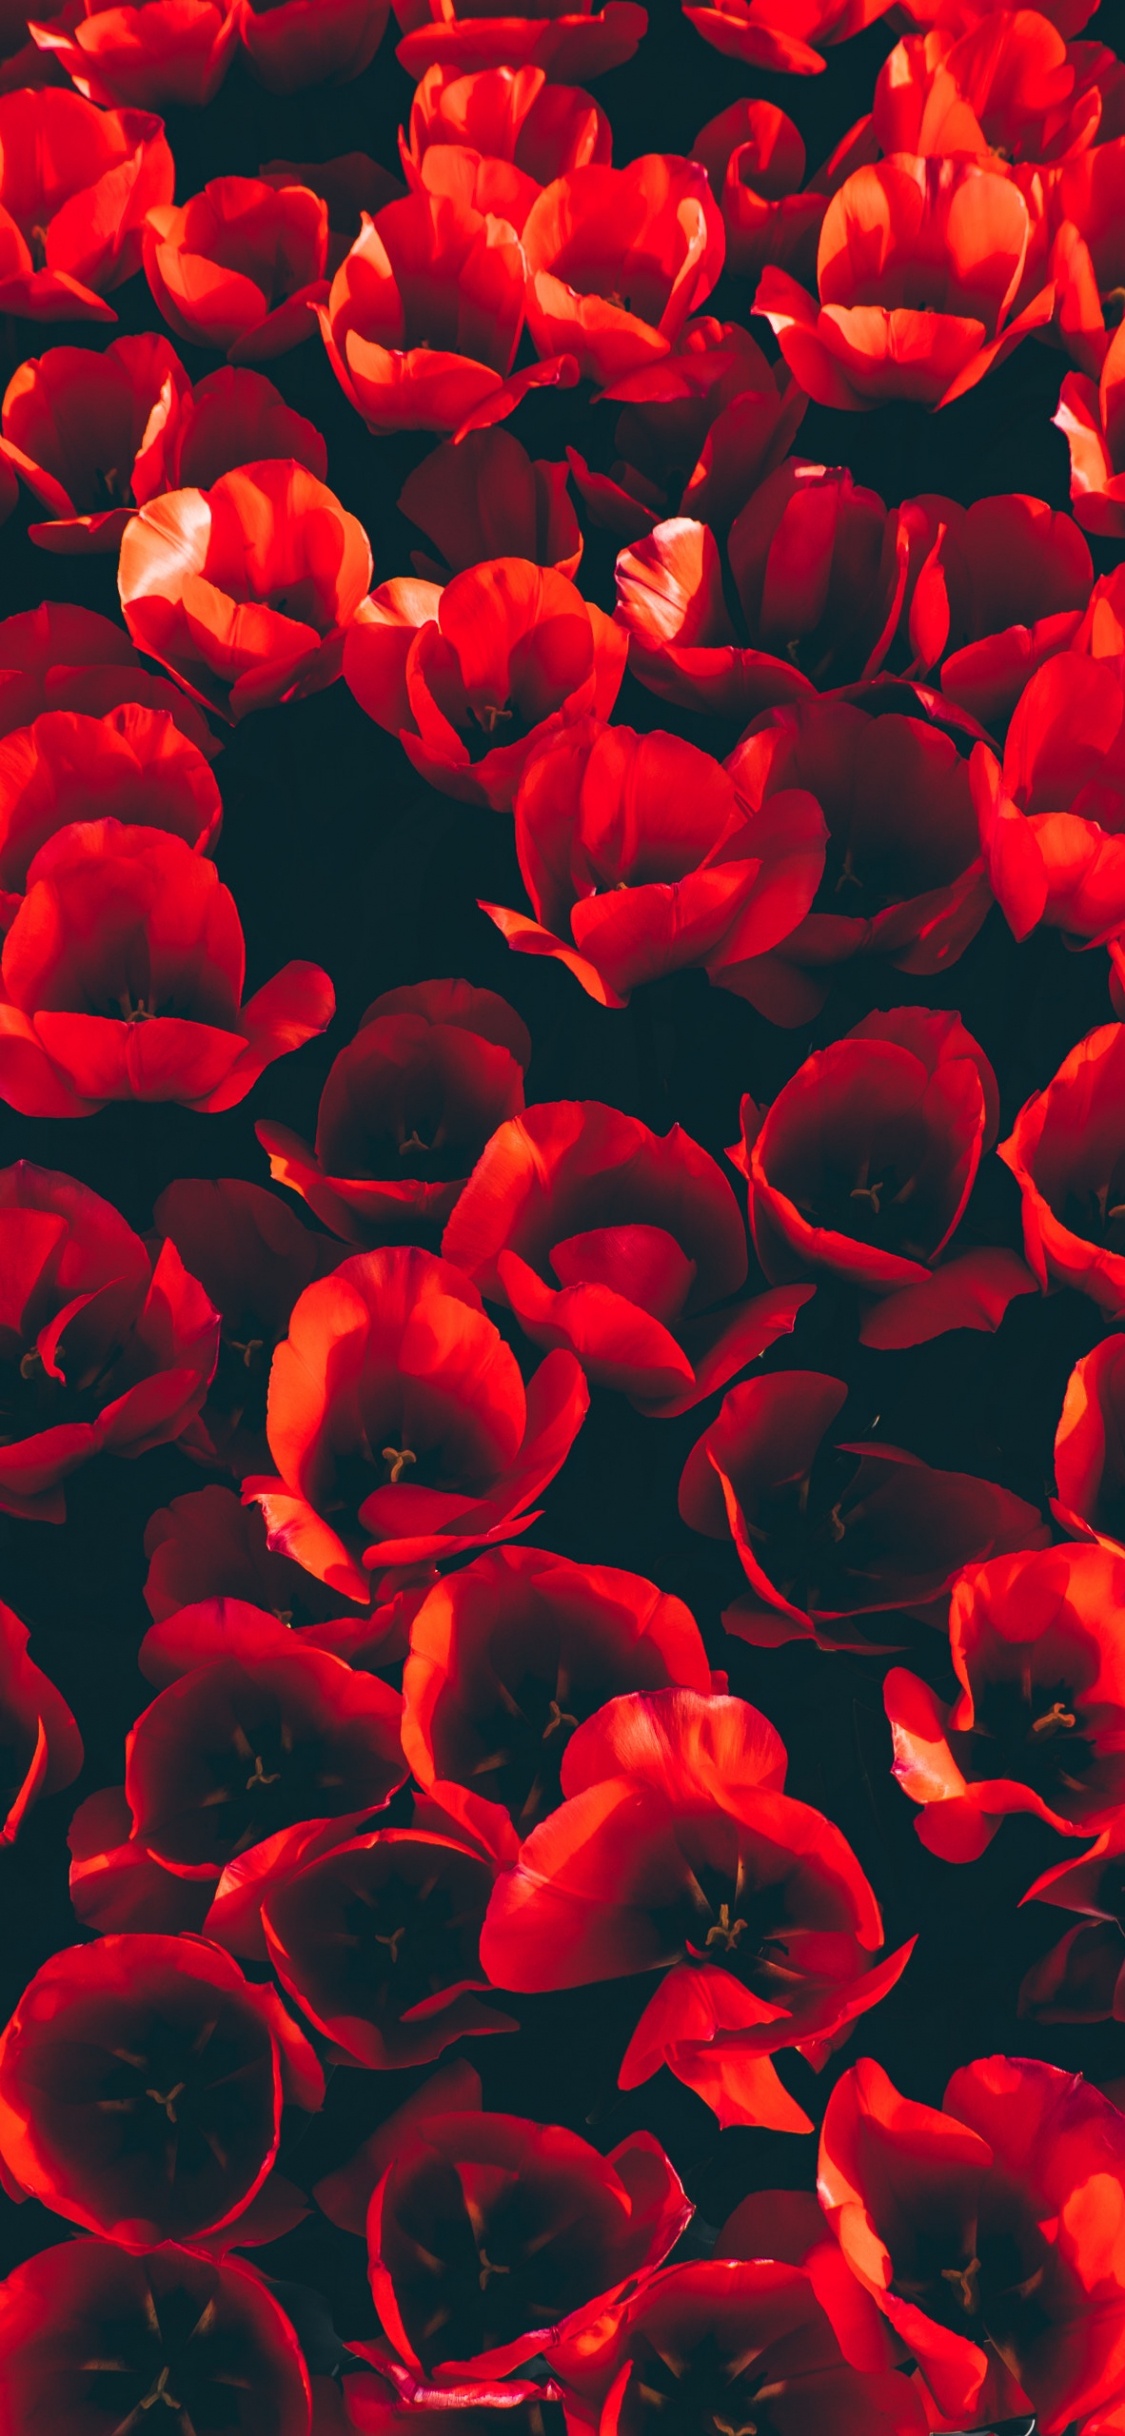 Red Flower Petals in Close up Photography. Wallpaper in 1125x2436 Resolution